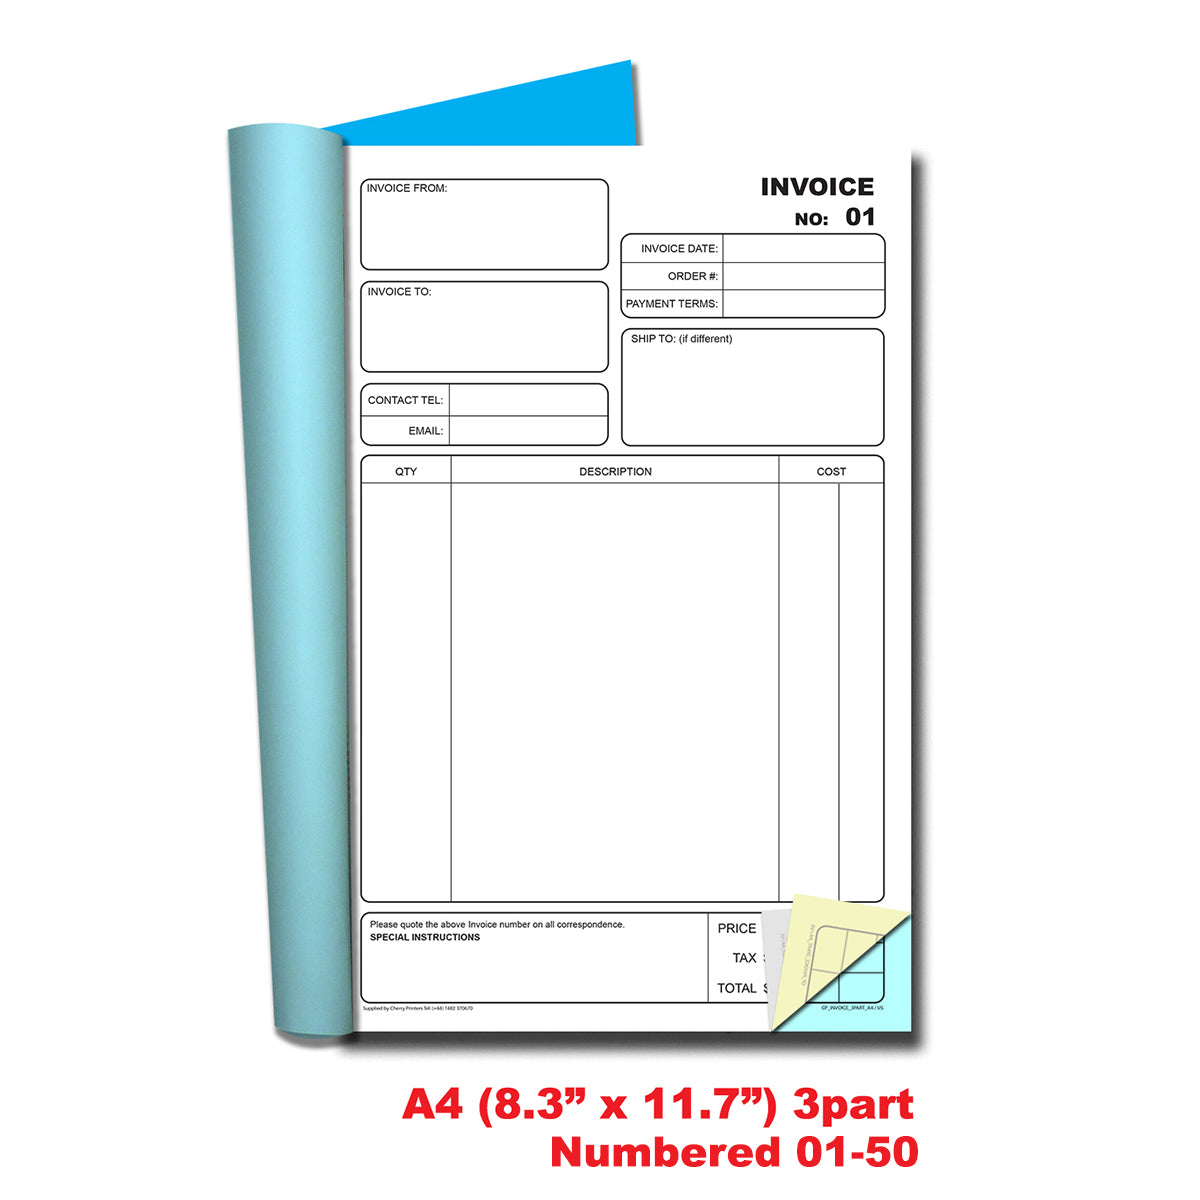 Invoice Numbered 01-50 | Triplicate Book | 3 part | Carbonless | 50 Sets Per Book | A4 - 8.27" x 11.69" | BOX OF 16 BOOKS